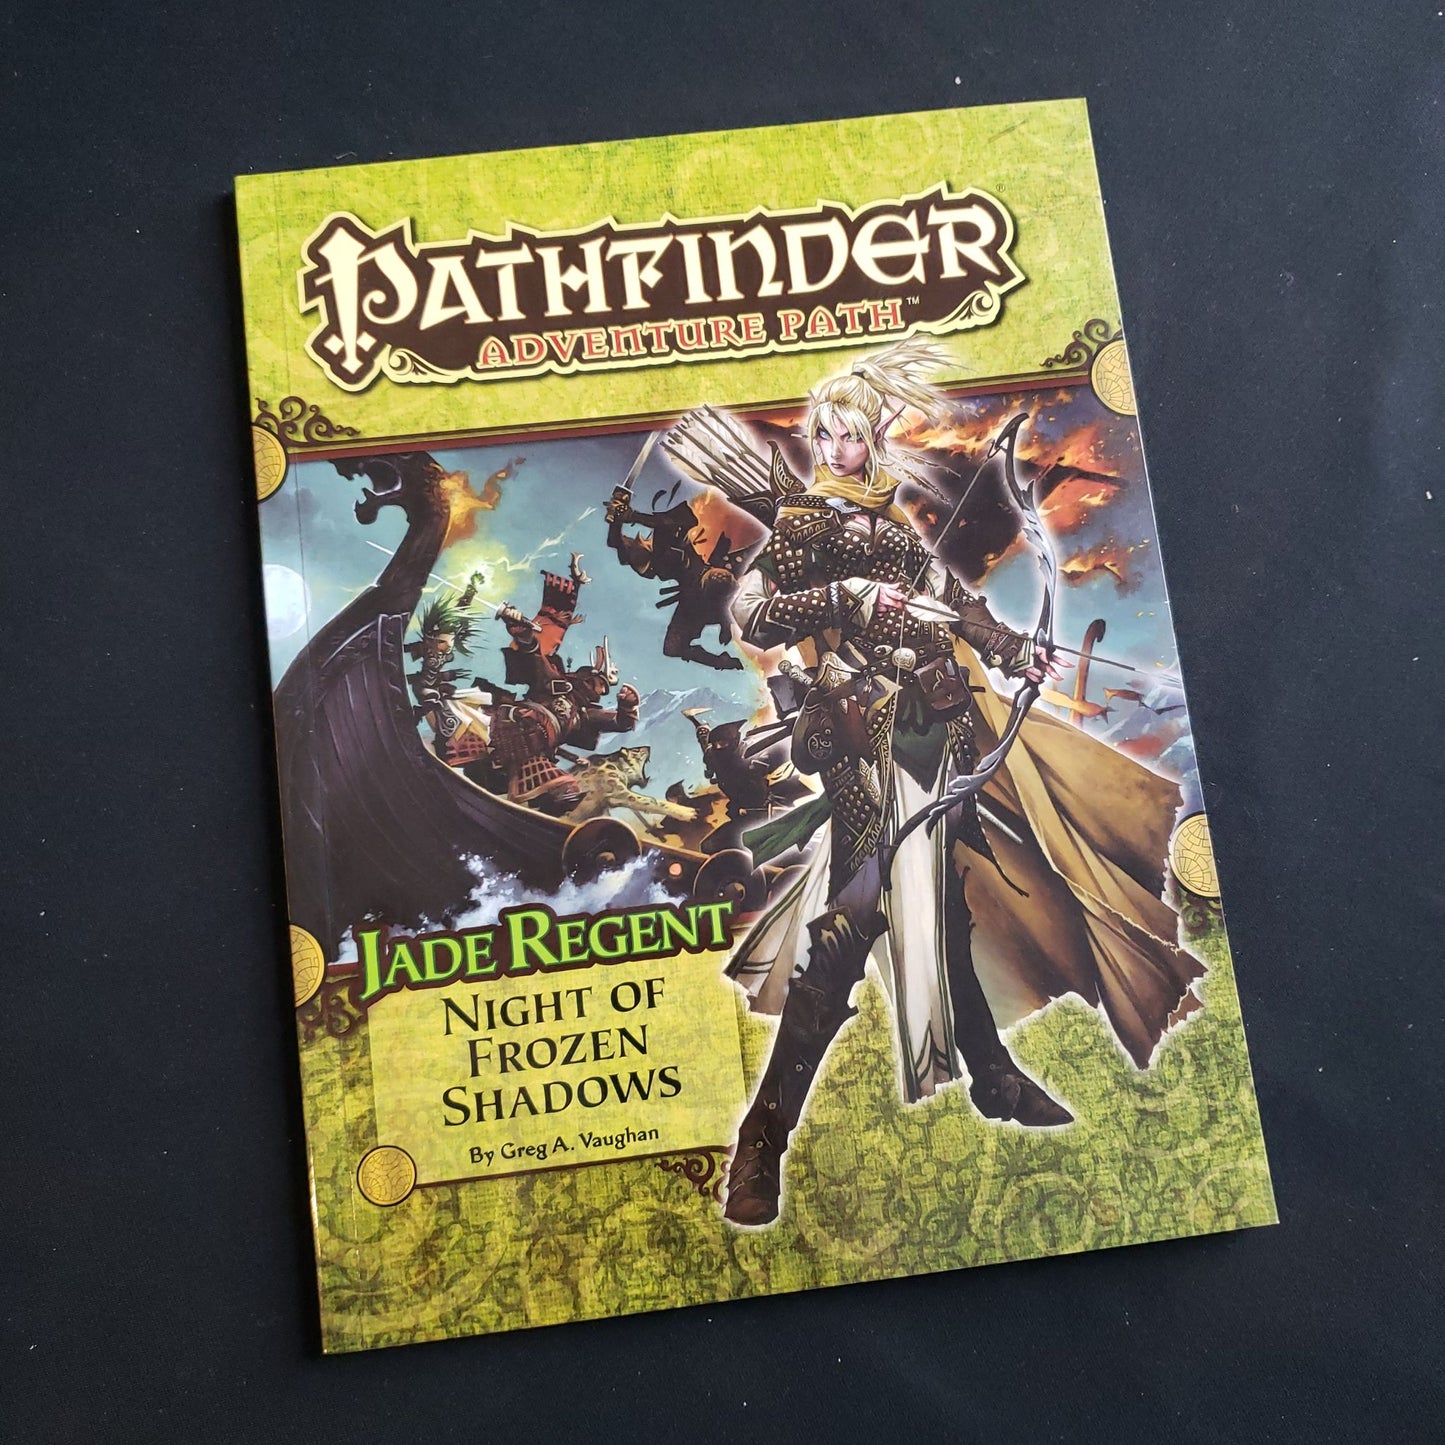 Image shows the front cover of the Night of Frozen Shadows book for the Pathfinder First Edition roleplaying game